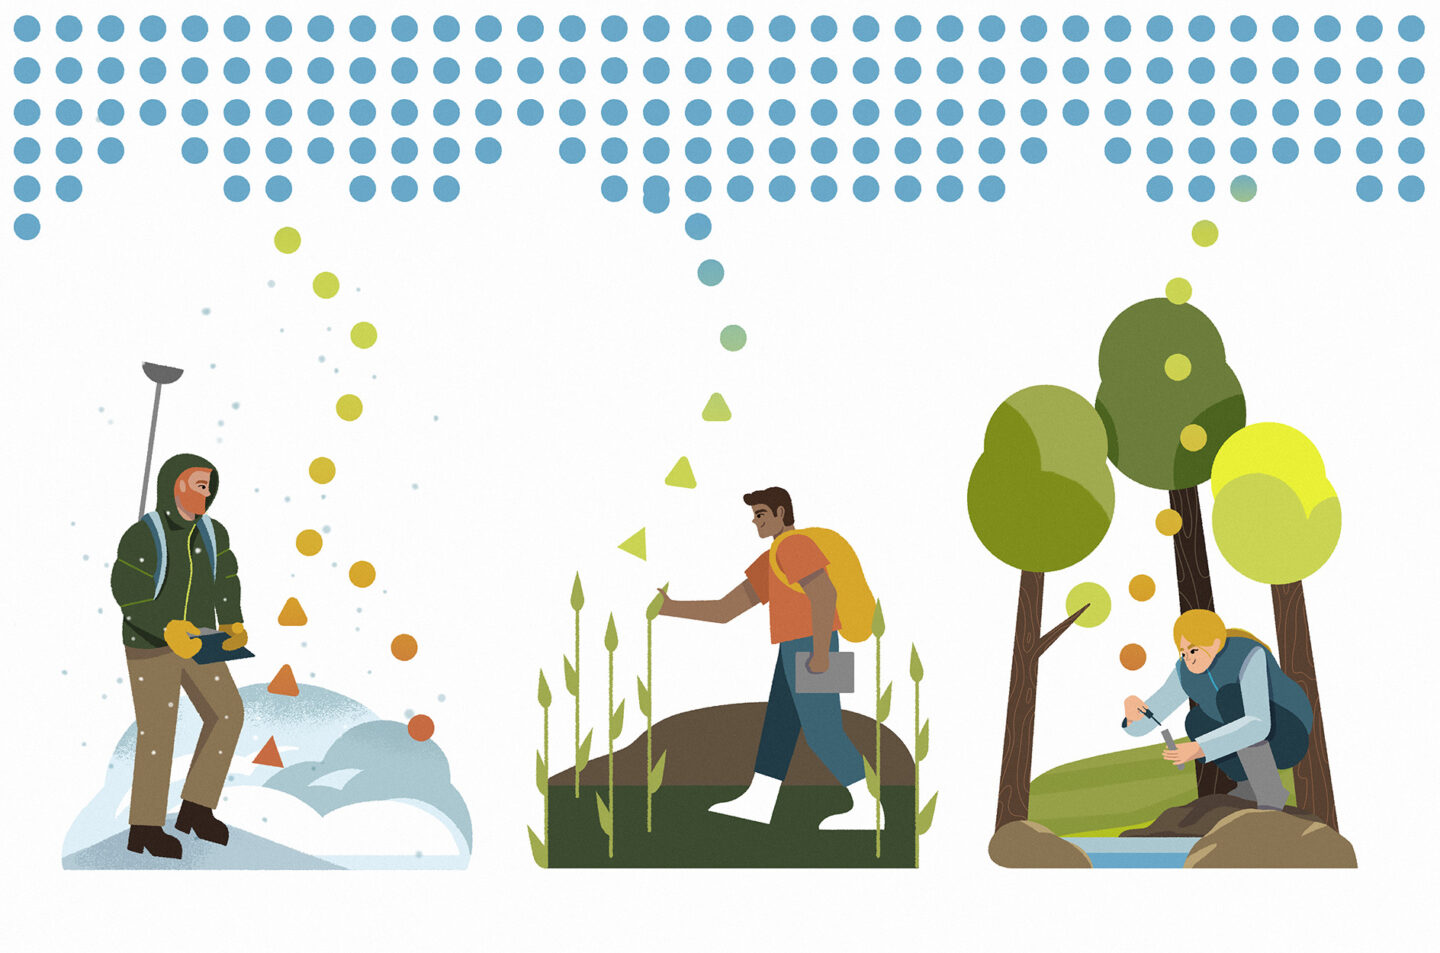 An illustration showing three human figures, one in snow, one in a marsh, and one by a wooded stream. All are collected data in the field.